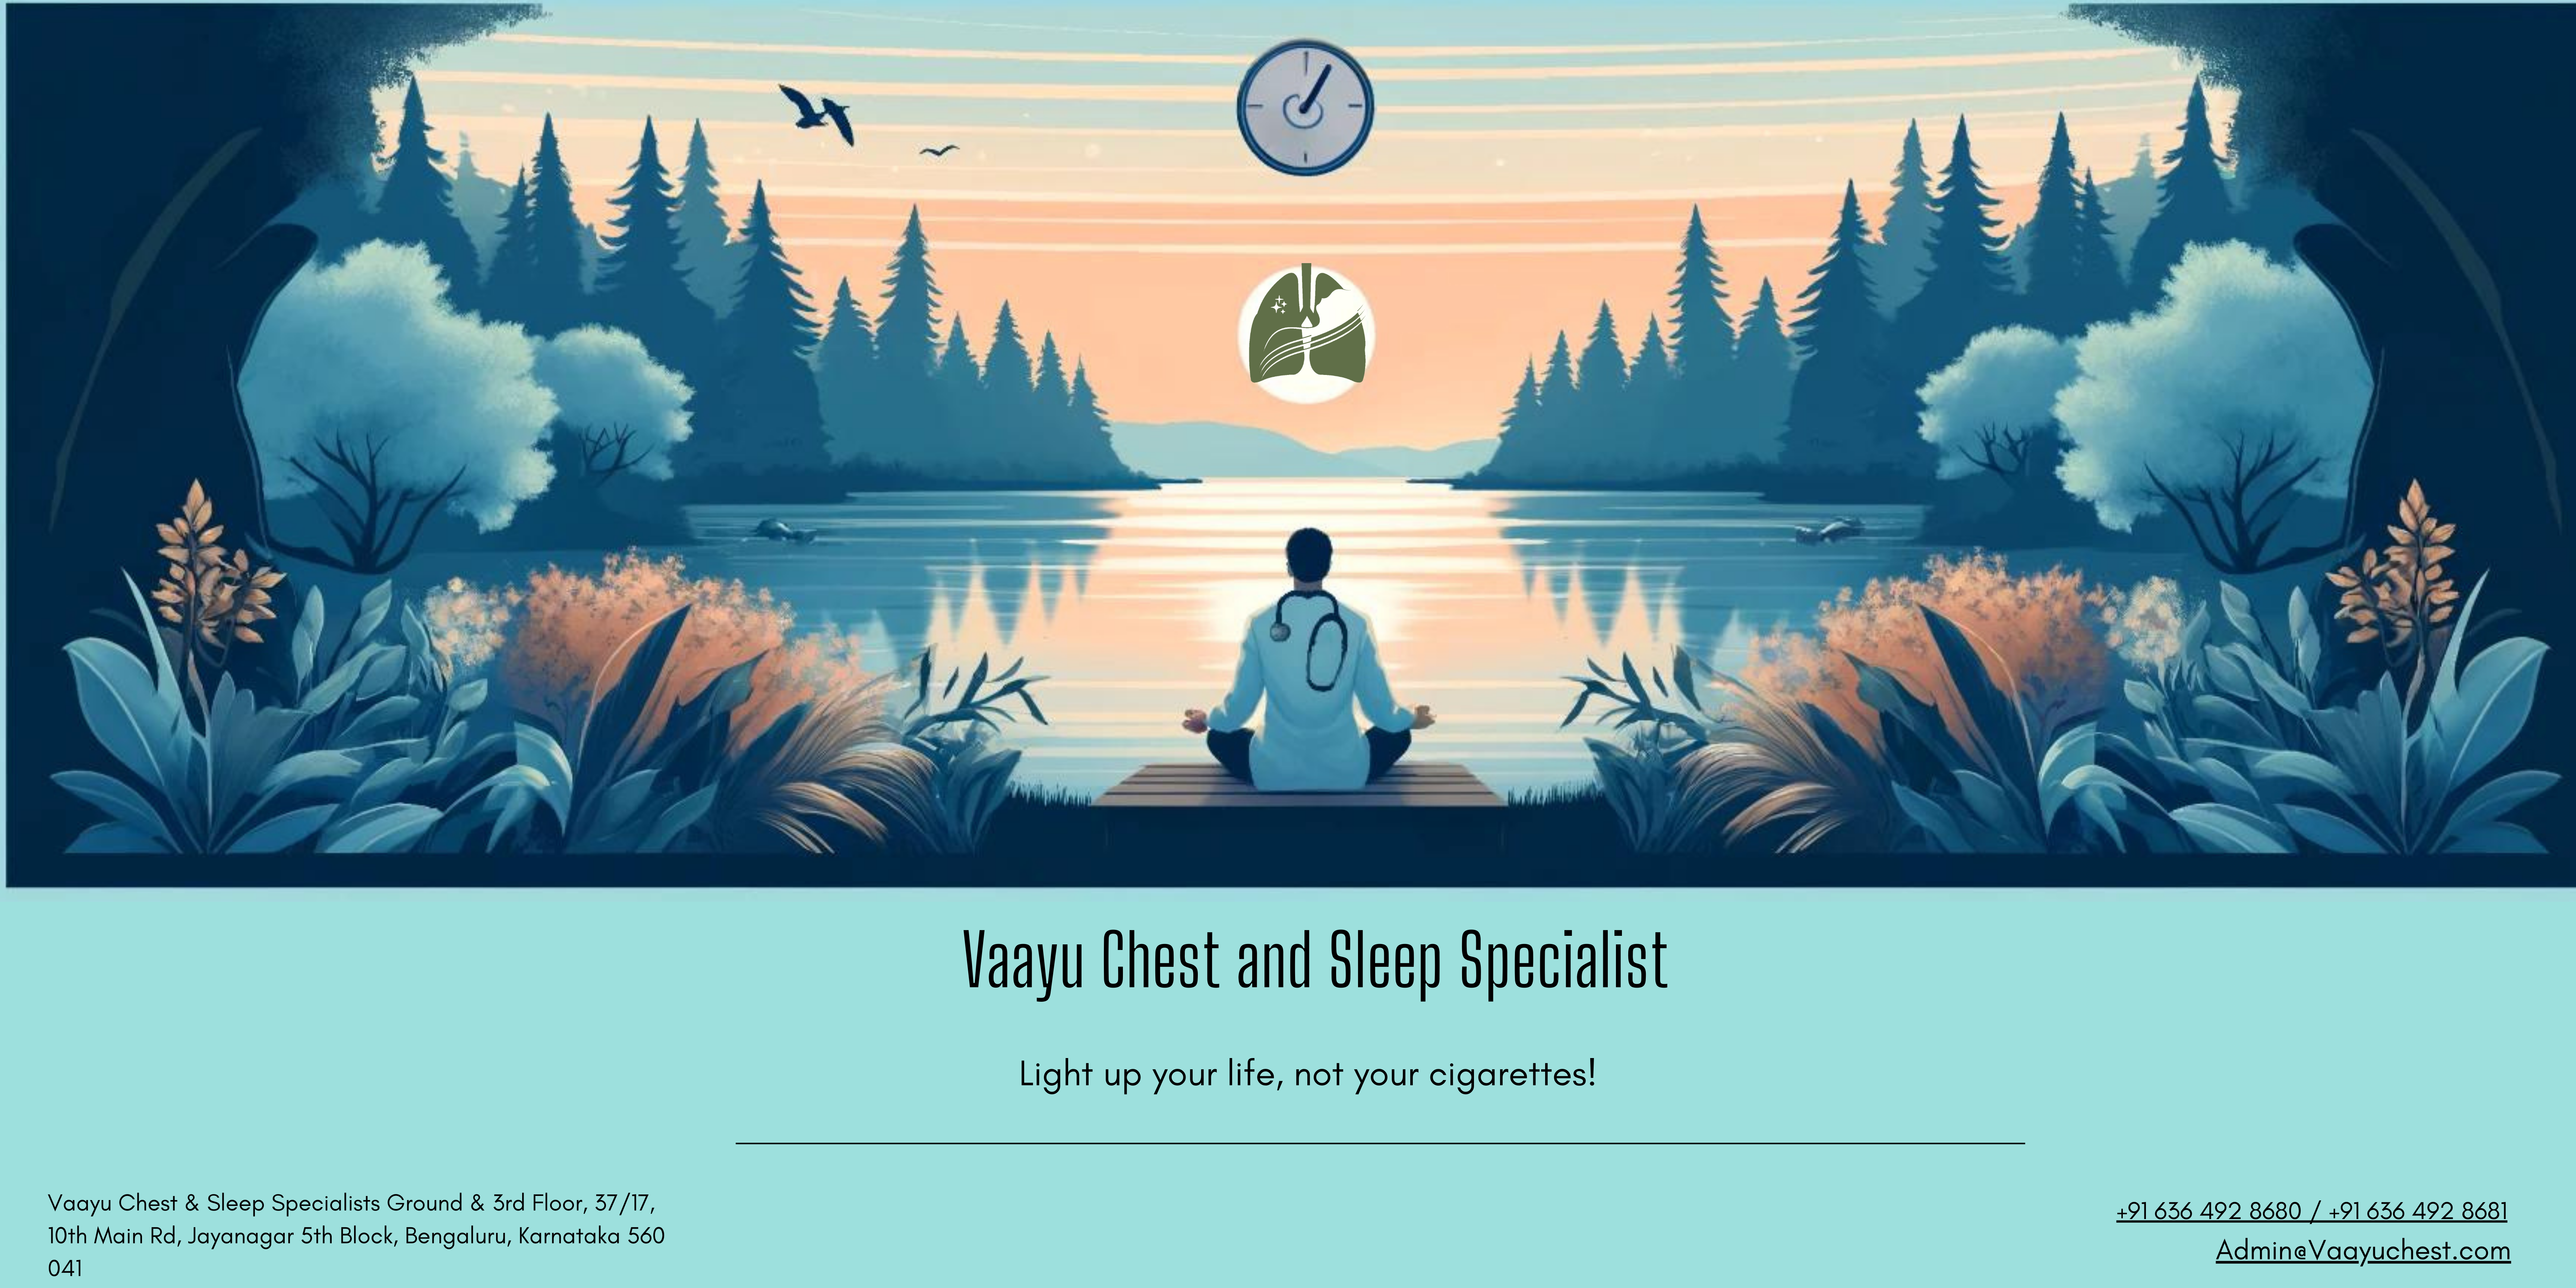 Health-focused banner for Vaayu Chest and Sleep Specialist in Jayanagar, Bangalore, depicting tranquility and wellness